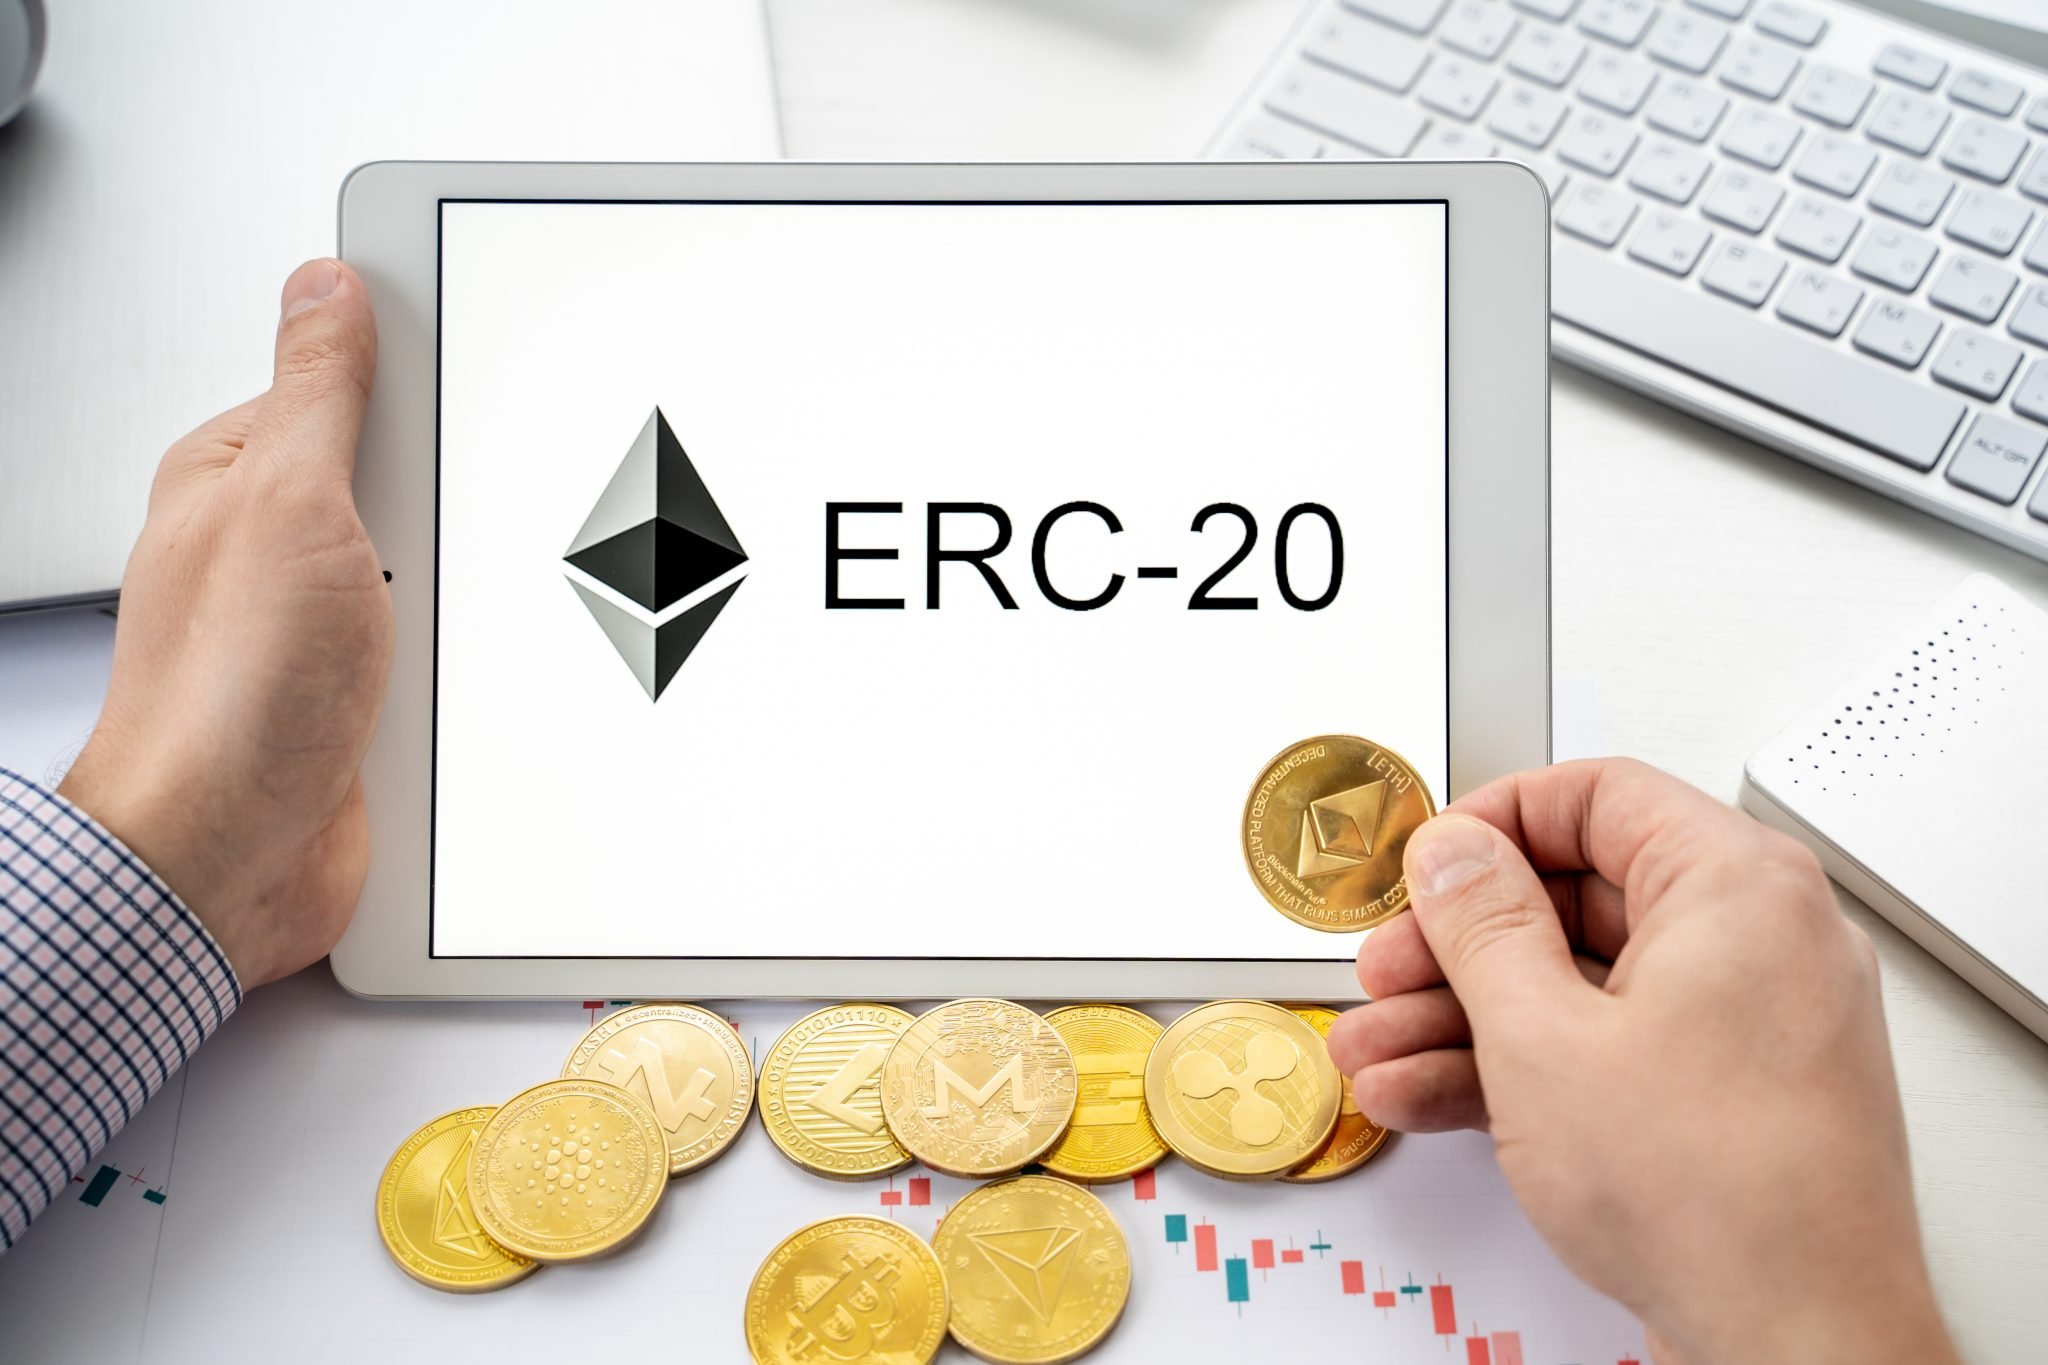 Russia Moscow 06.05.2021.Businessman holding tablet with logo of ERC-20 official protocol of Ethereum ETH network. Standard for creating tokens on Ethereum blockchain.